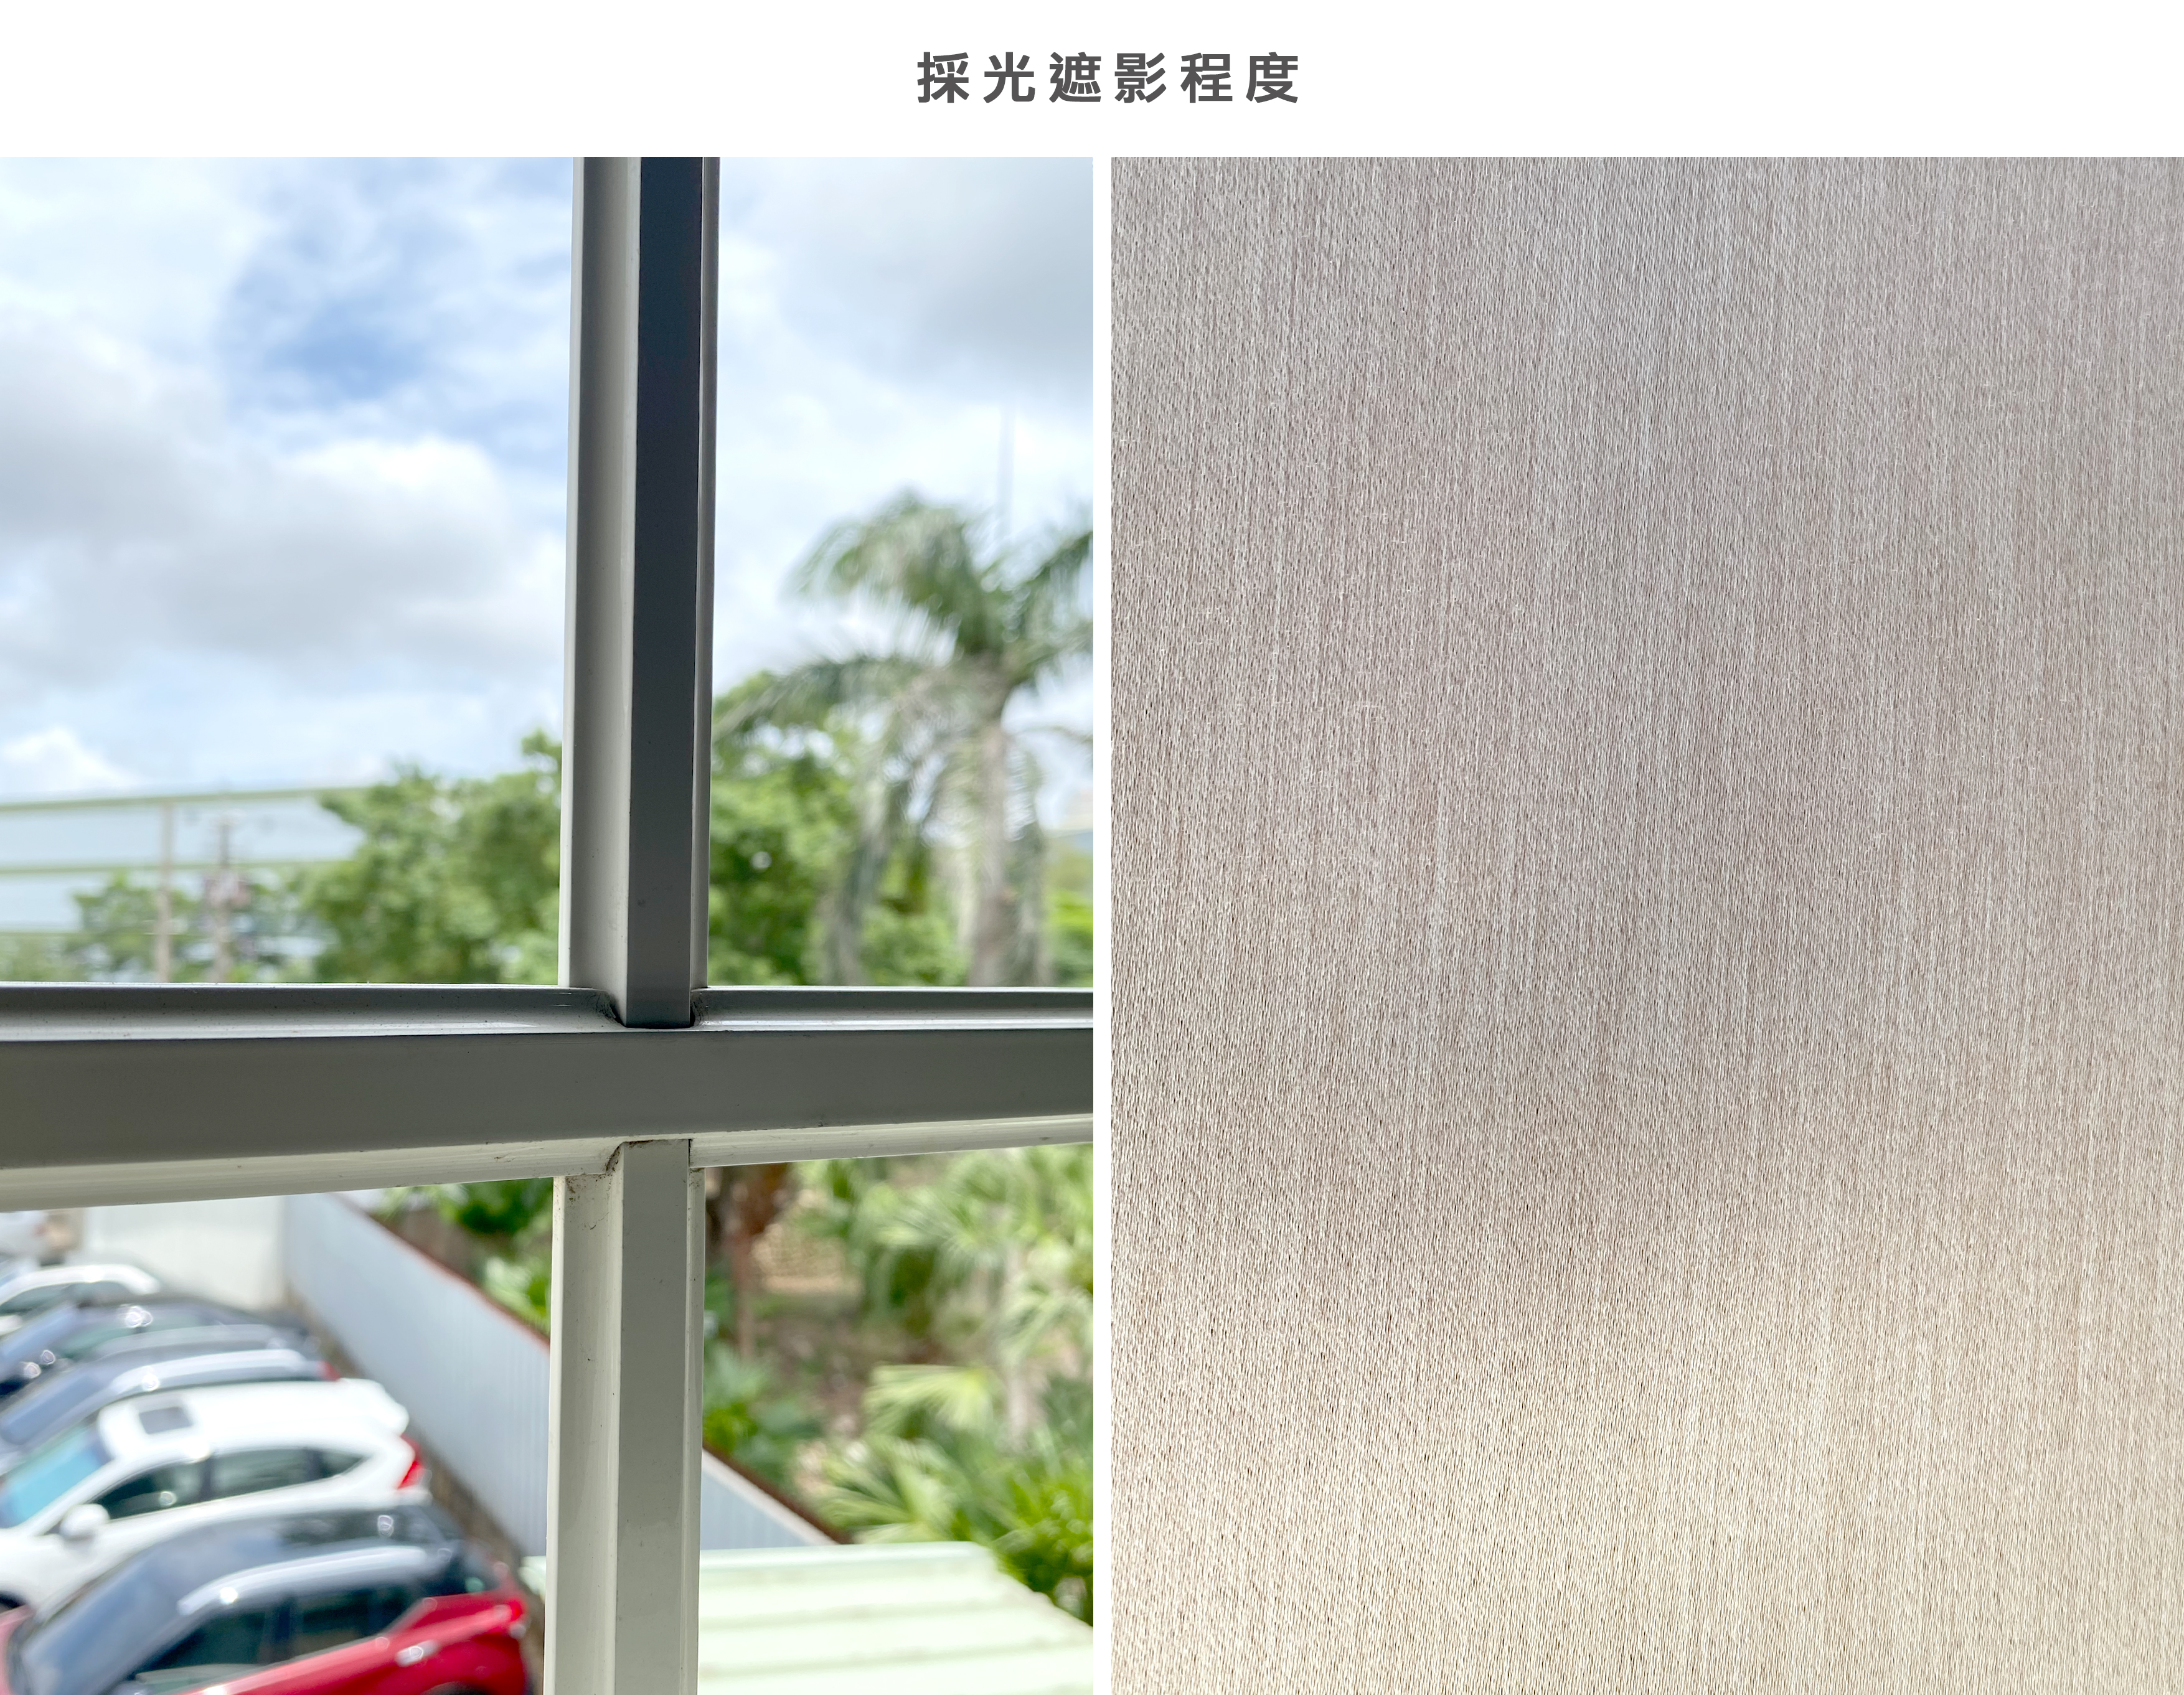 Lo-Fi House Select Curtains　Blackout Blackout Brushed - Latte Heat Insulation Blinds & Shades Child Safety／Cordless Blinds & Shades Blackout Blinds & Shades Motorized Blinds／Smart Blinds & Shades